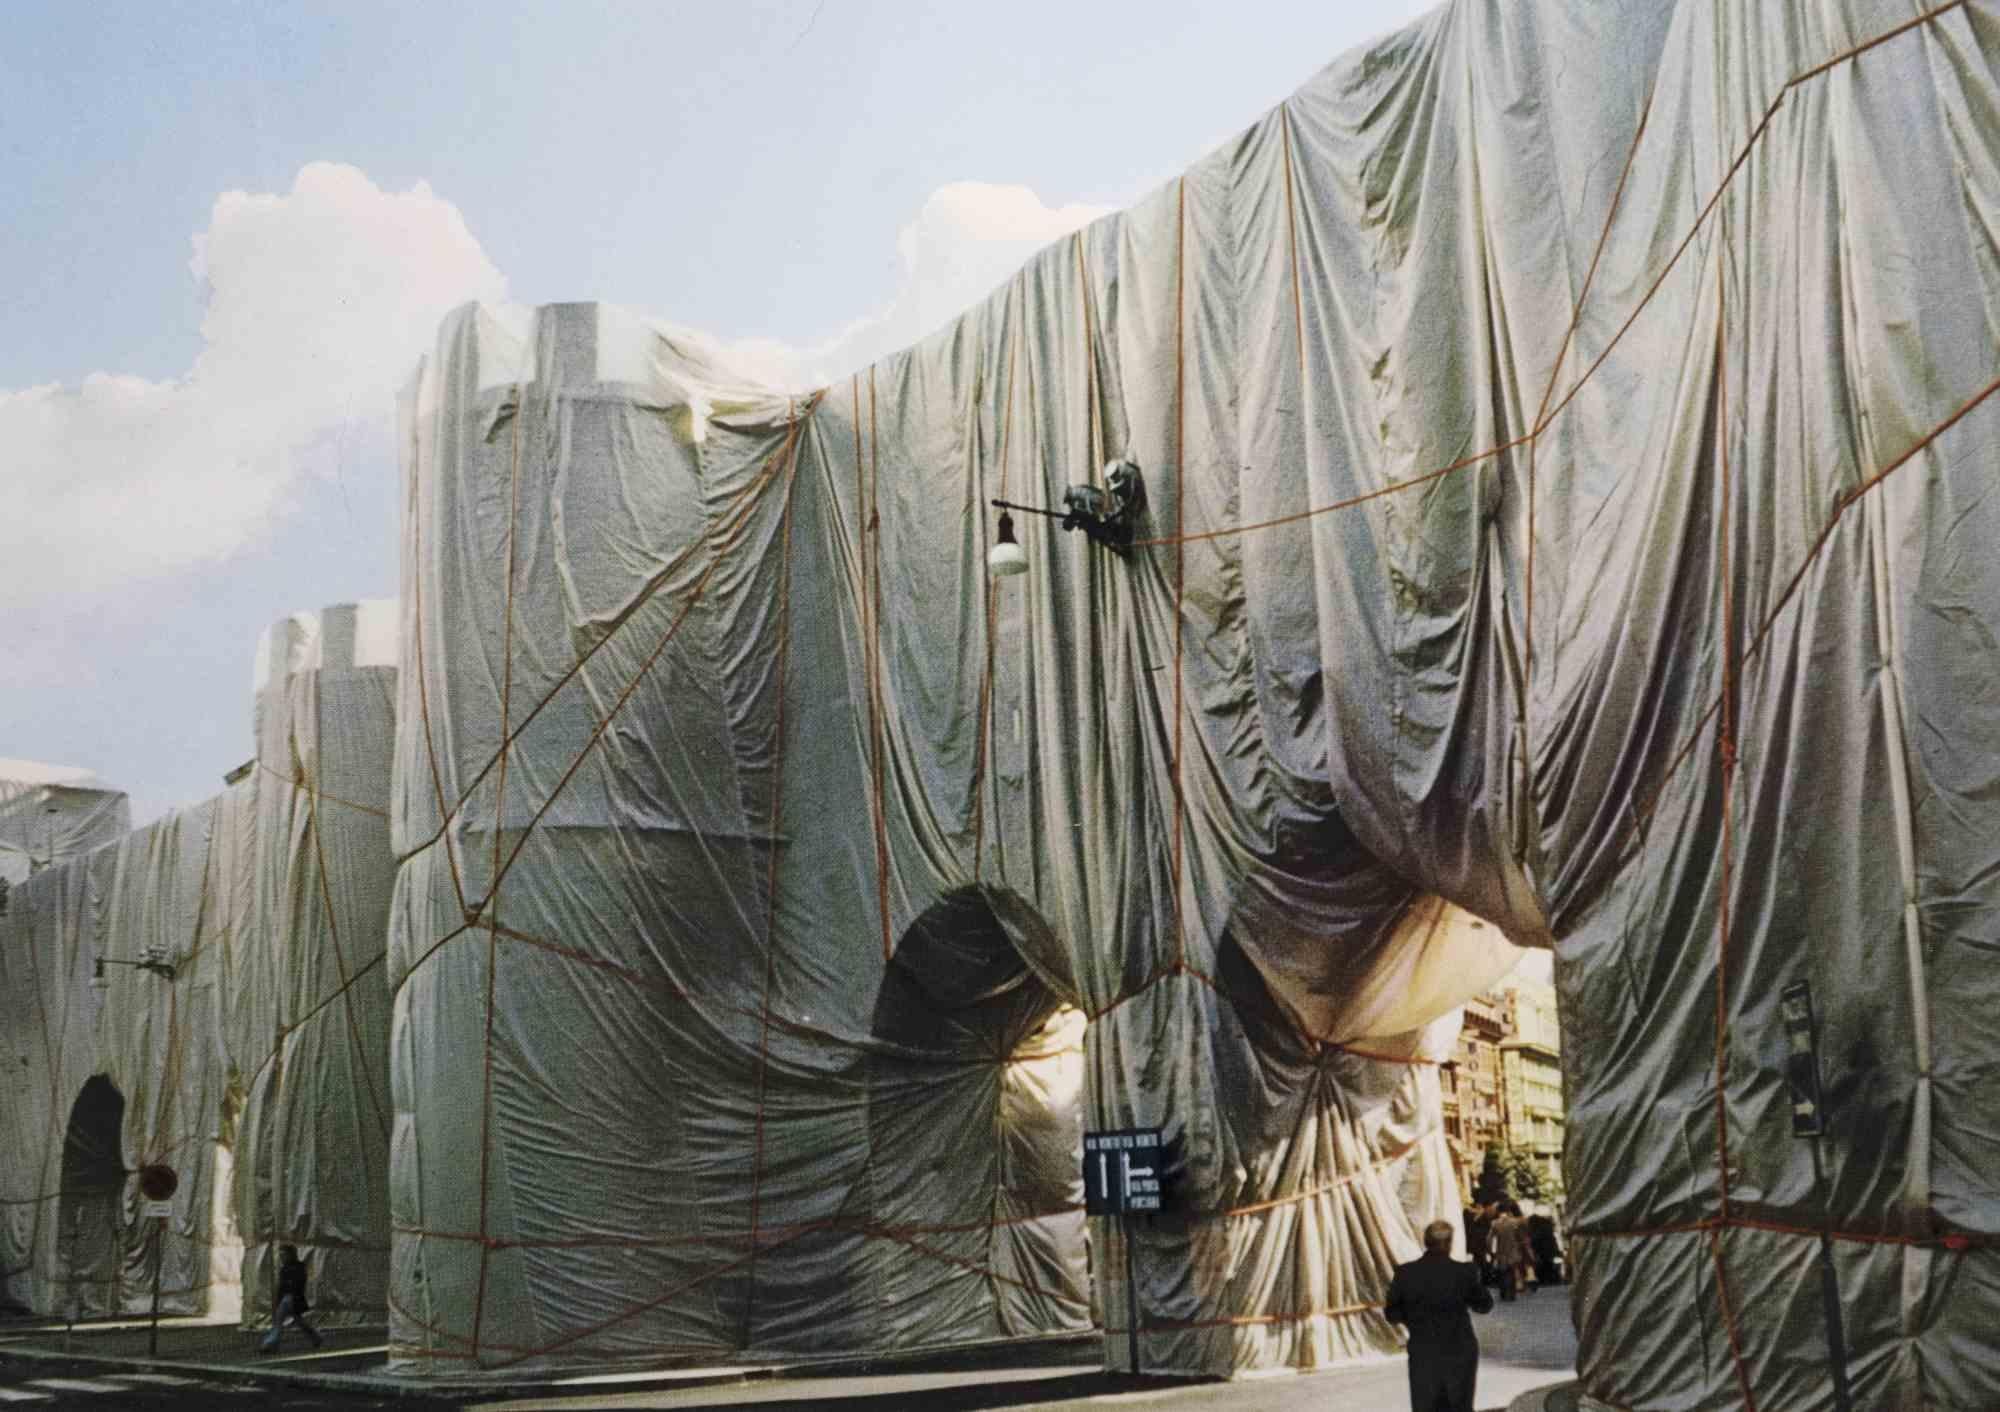 Wrapped Roman Wall - Photolithograph by Christo - 1974 ca. - Photograph by Christo and Jeanne-Claude